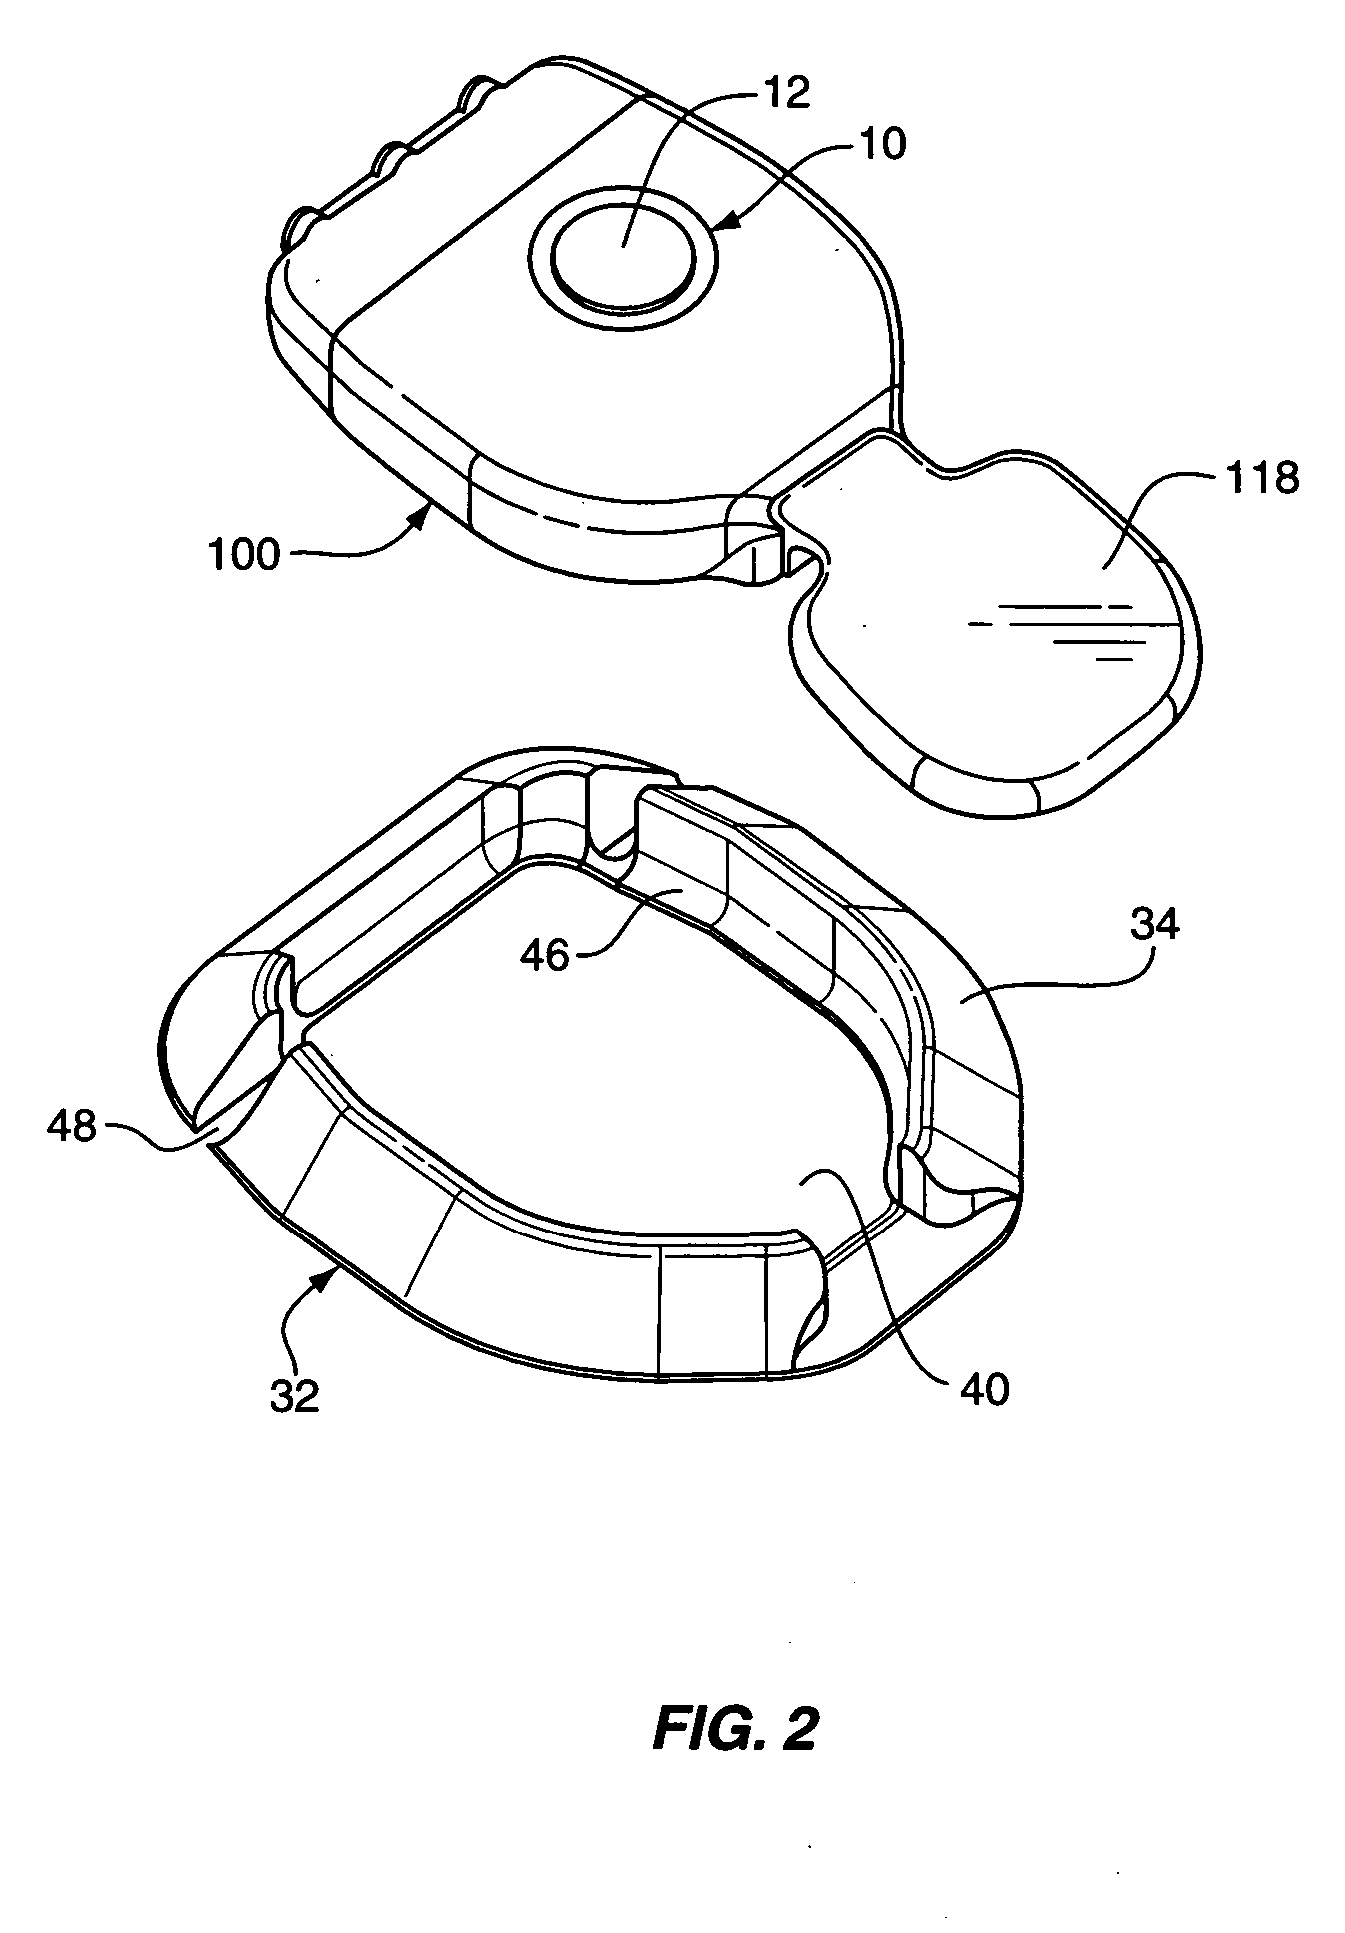 Passive vibration isolation of implanted microphone